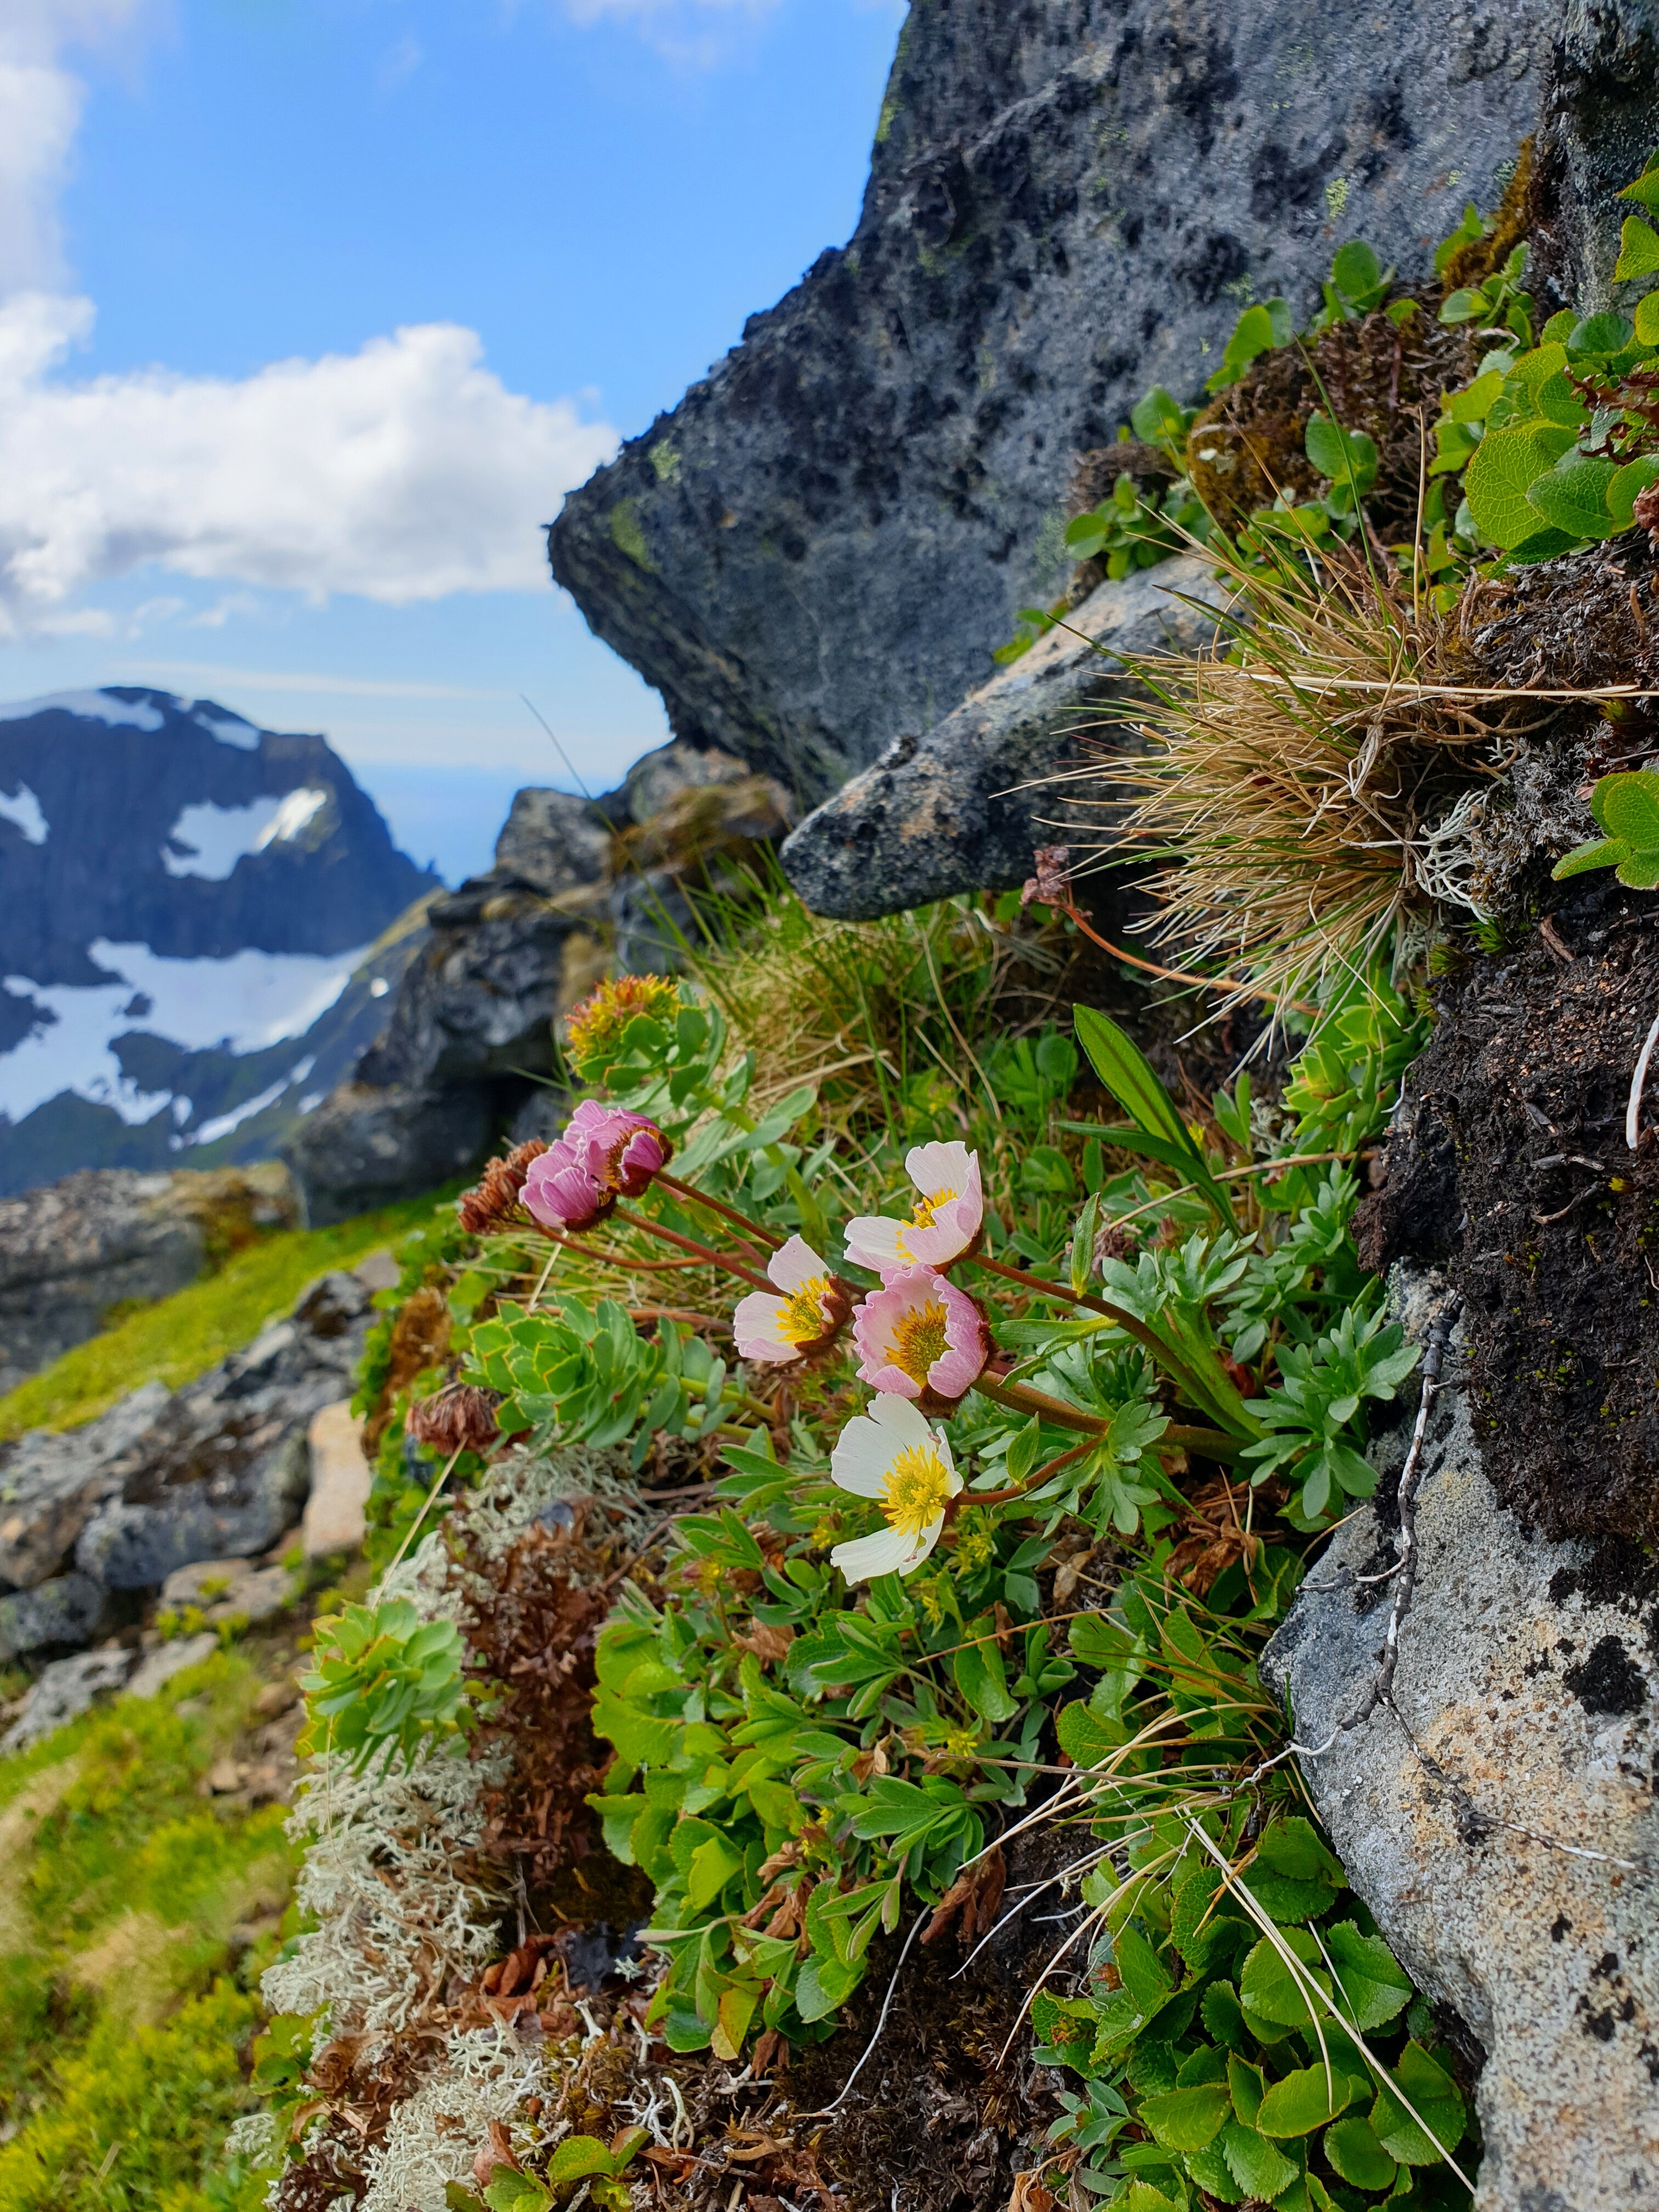 No other mountain plant can be found higher up in the mountains in Norway than issoleia.